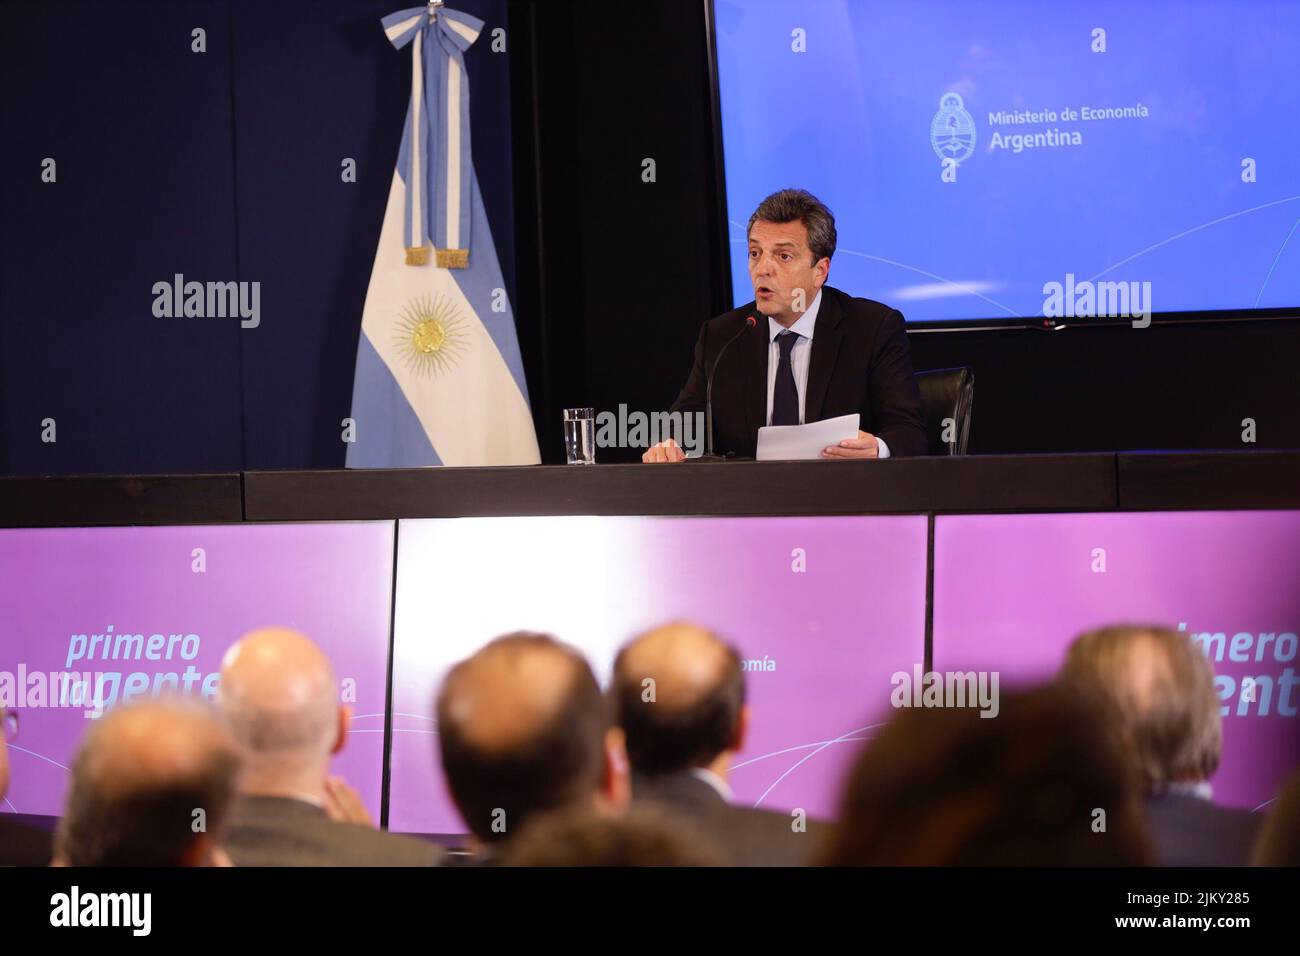 Buenos Aires, Argentina, 3rd August 2022. The new Minister of Economy, Productive Development and Agriculture, Sergio Massa, at a press conference after being sworn in at Government House. (Credit: Esteban Osorio/Alamy Live News) Stock Photo